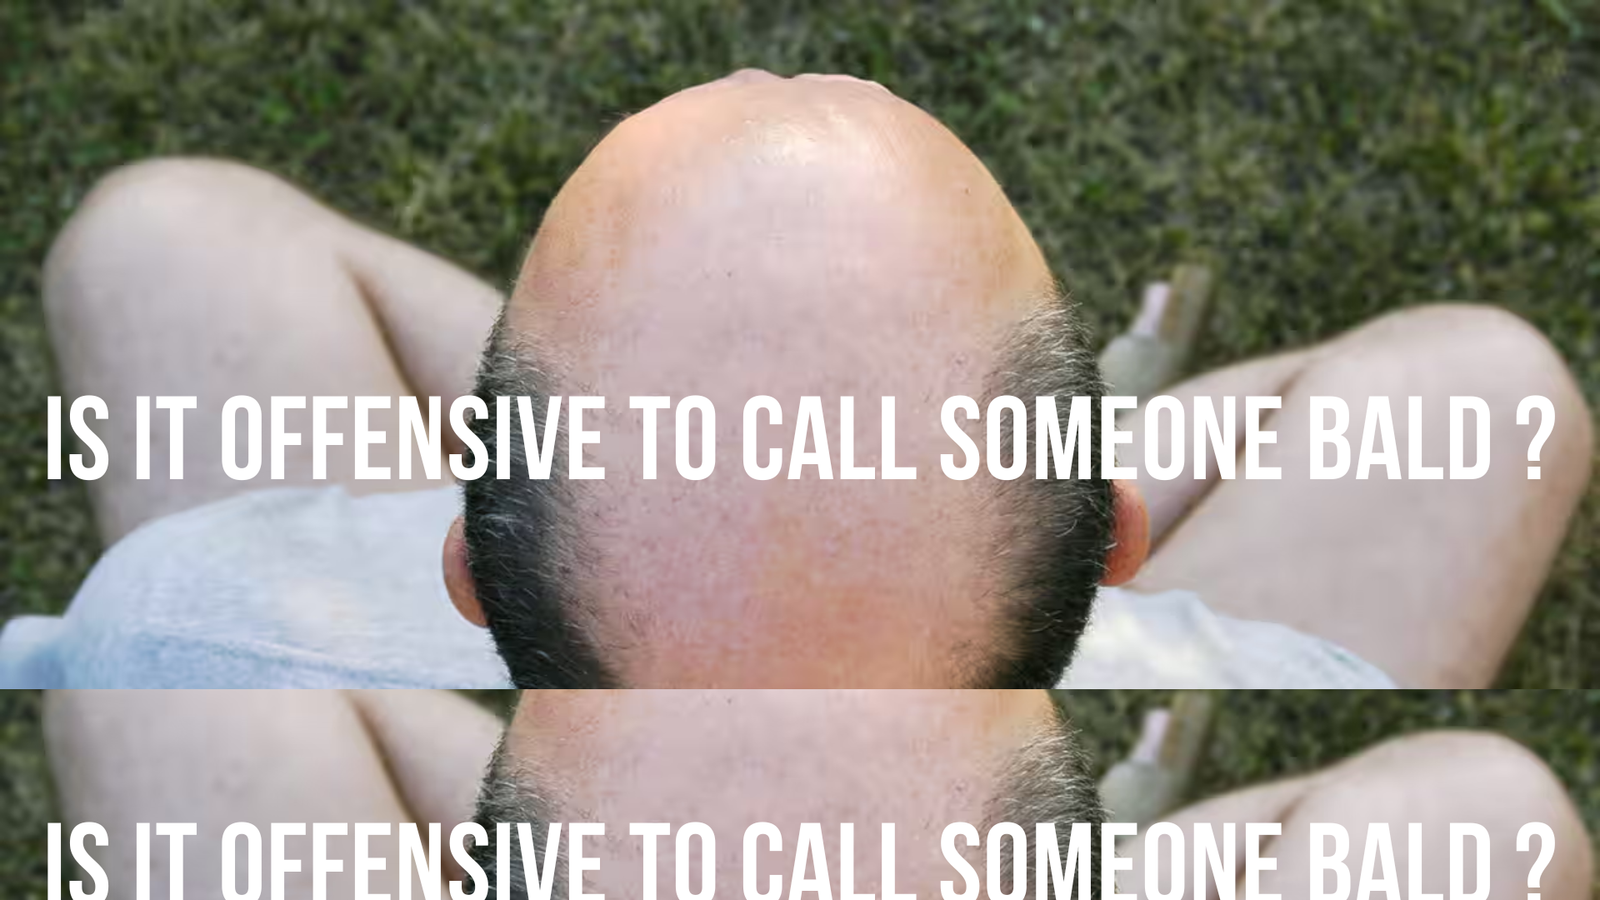 The Impact of the Term “Baldy”: Is it Offensive or Harmless?